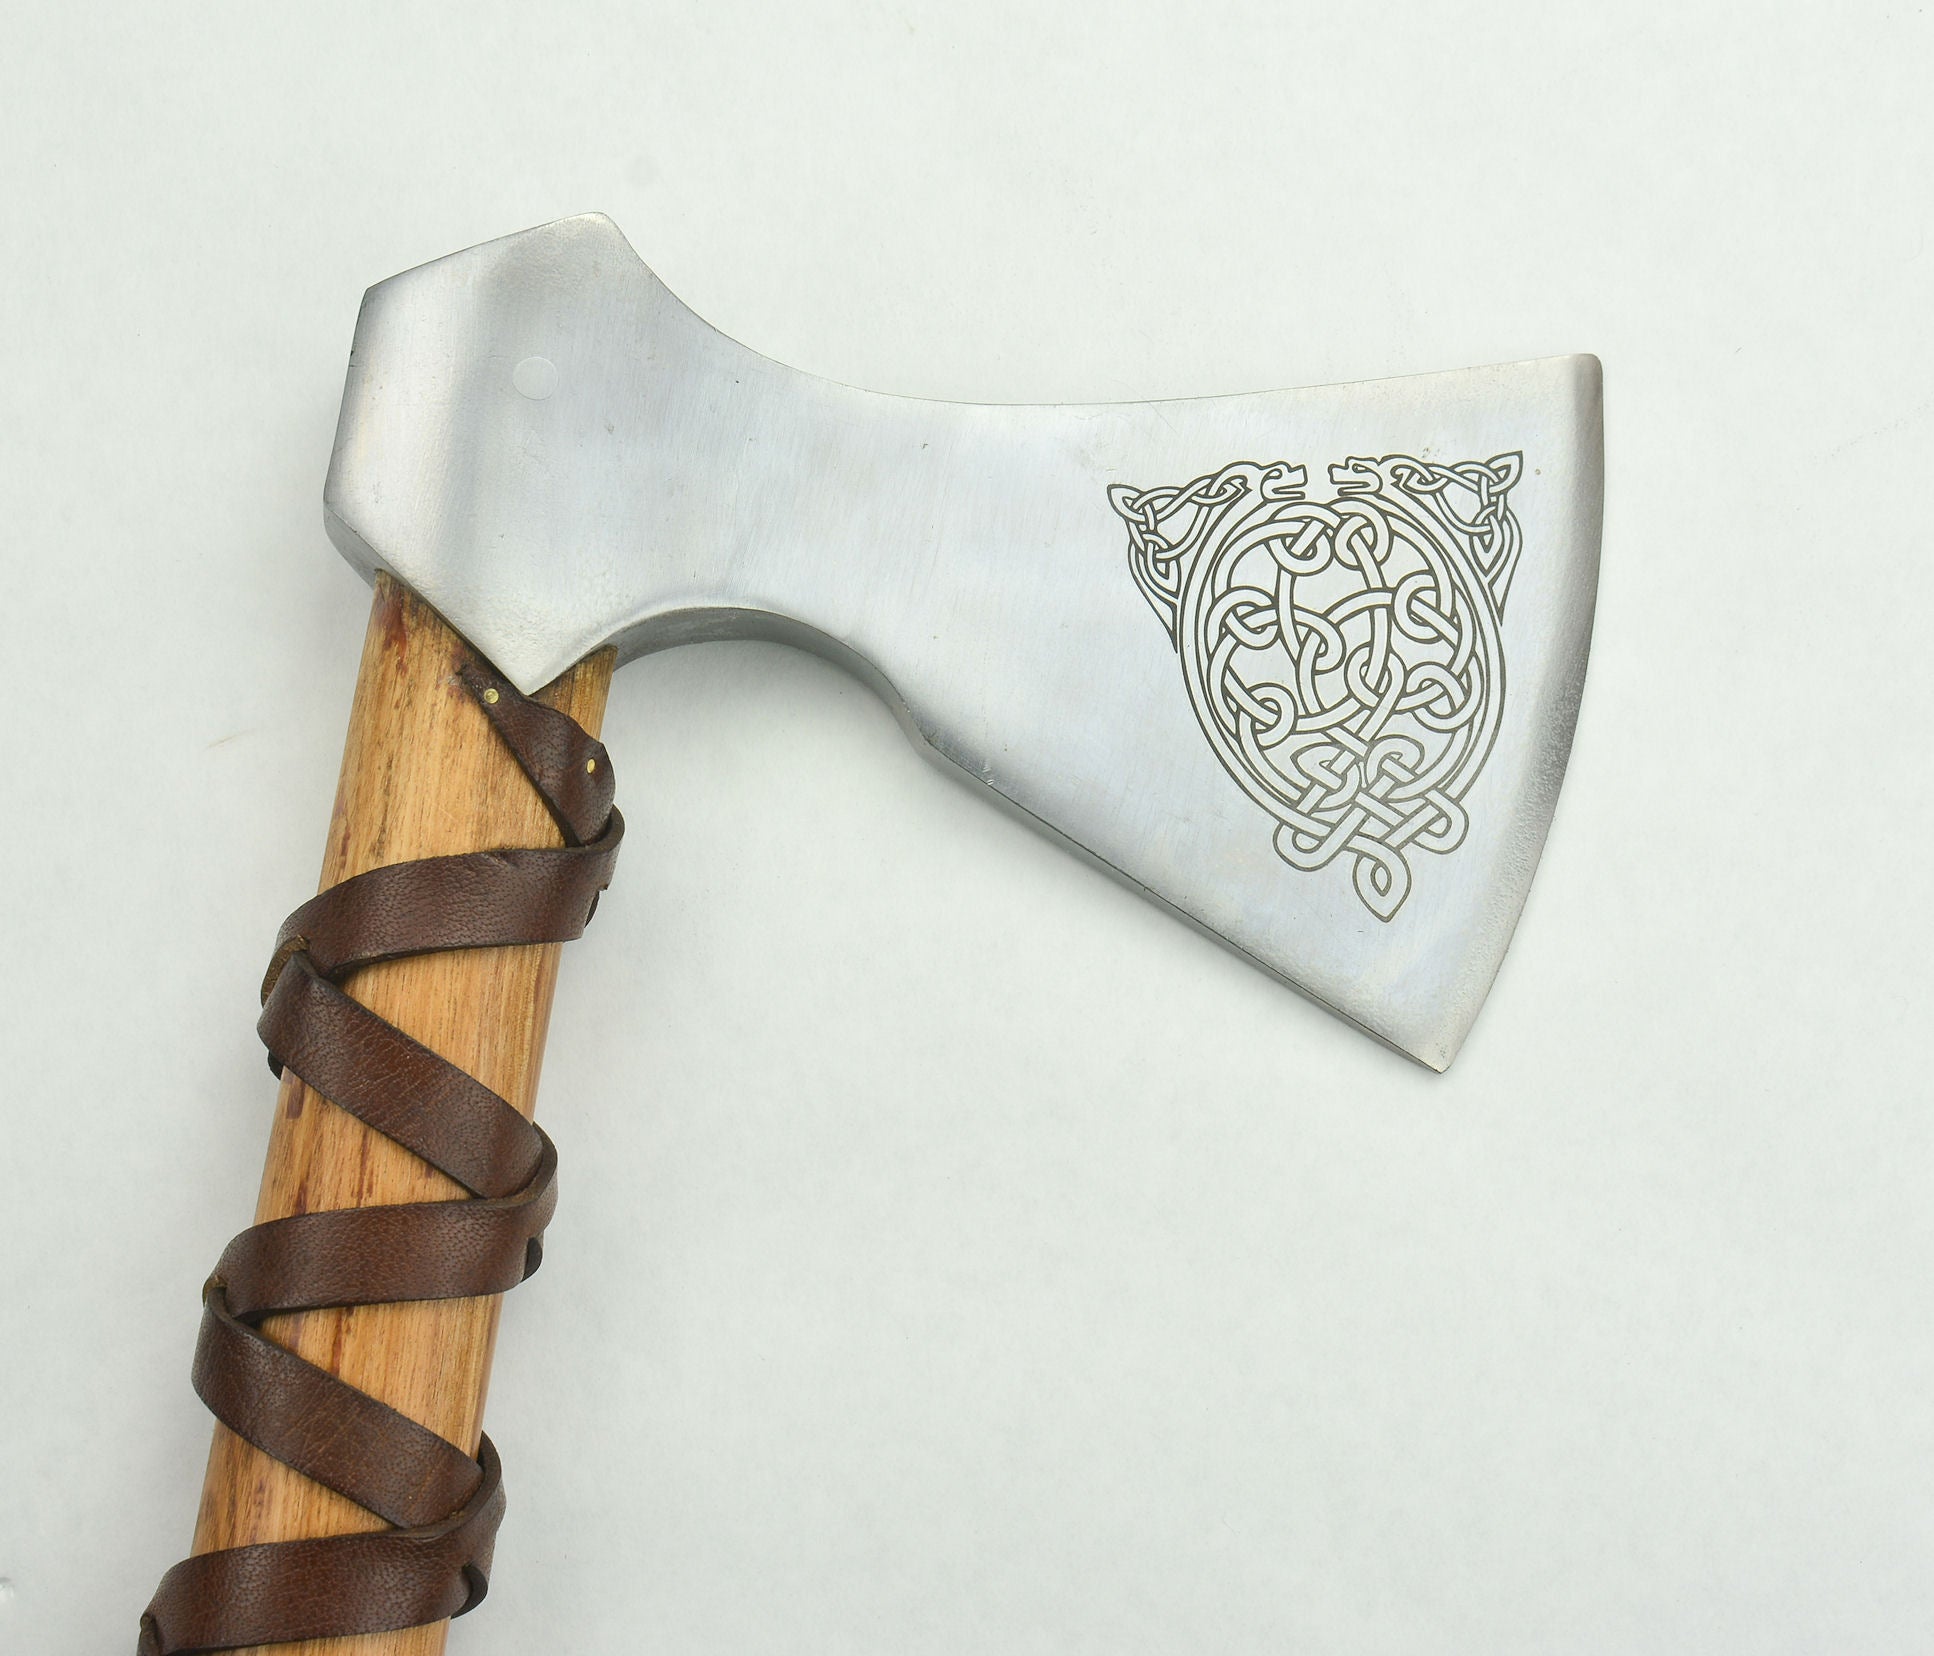 Viking Type F Axe with Etched Norse Design